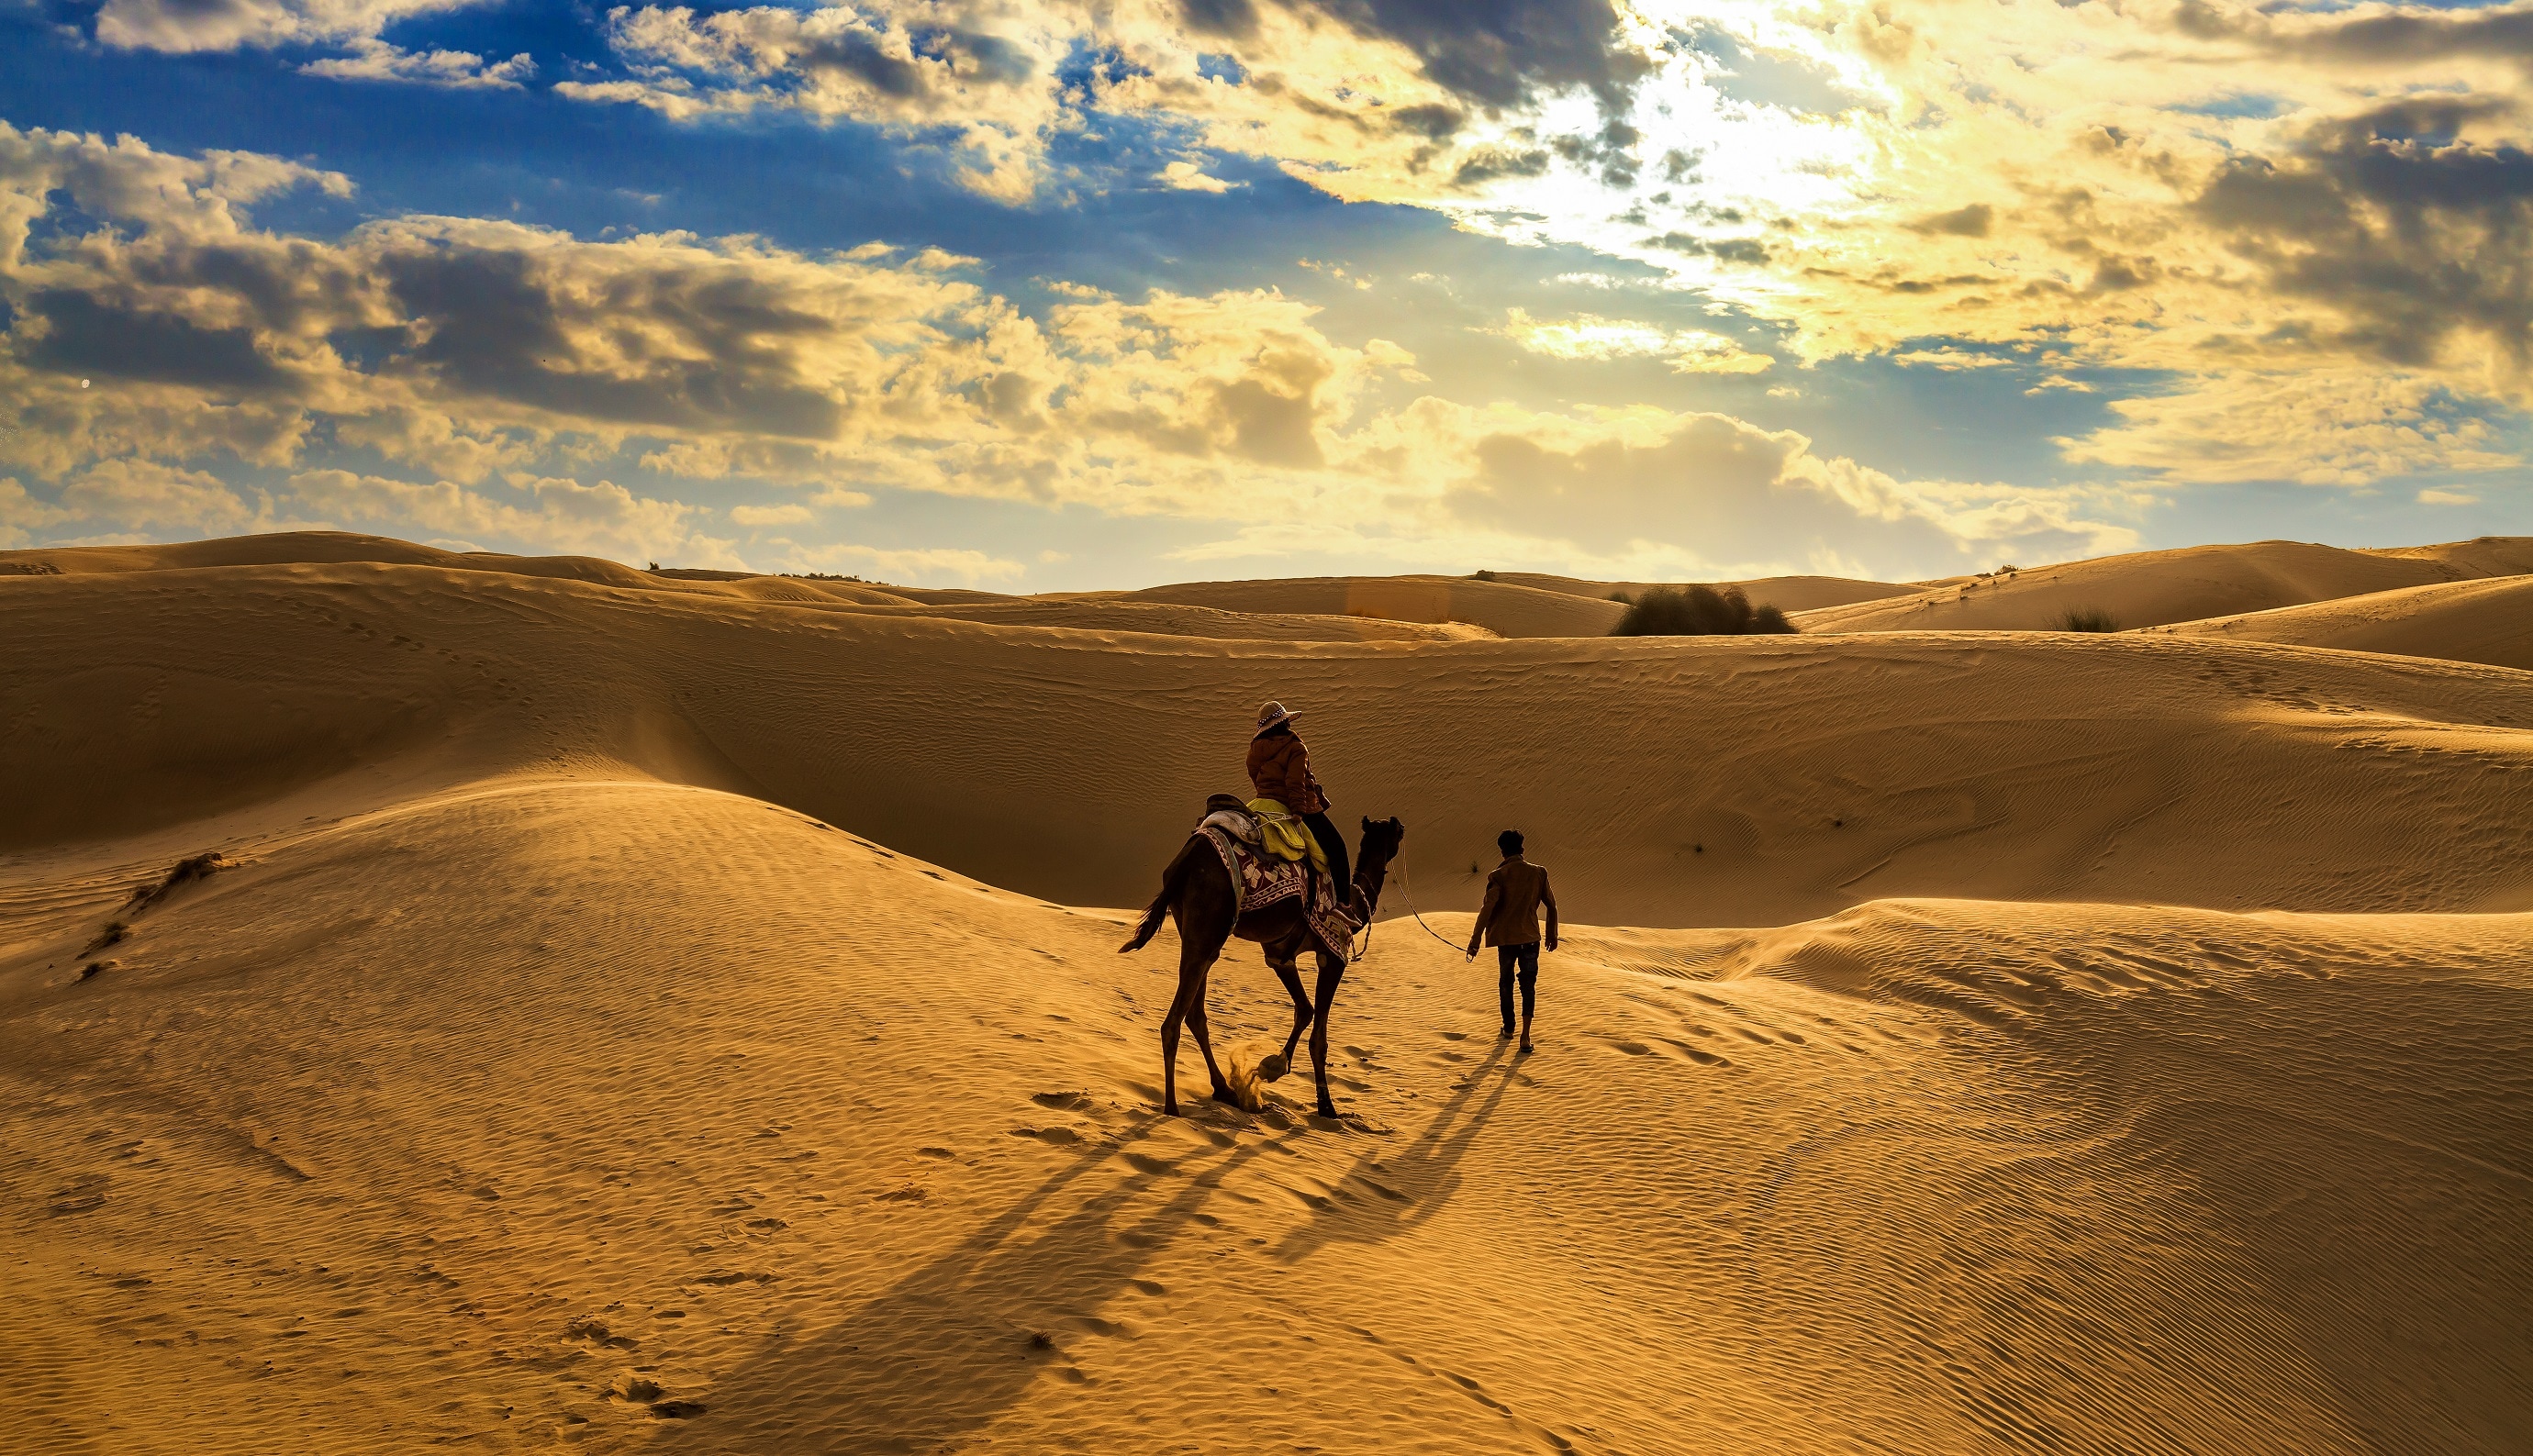 Cultural Heritage of the Thar Desert and the Tourist Places in Jaisalmer